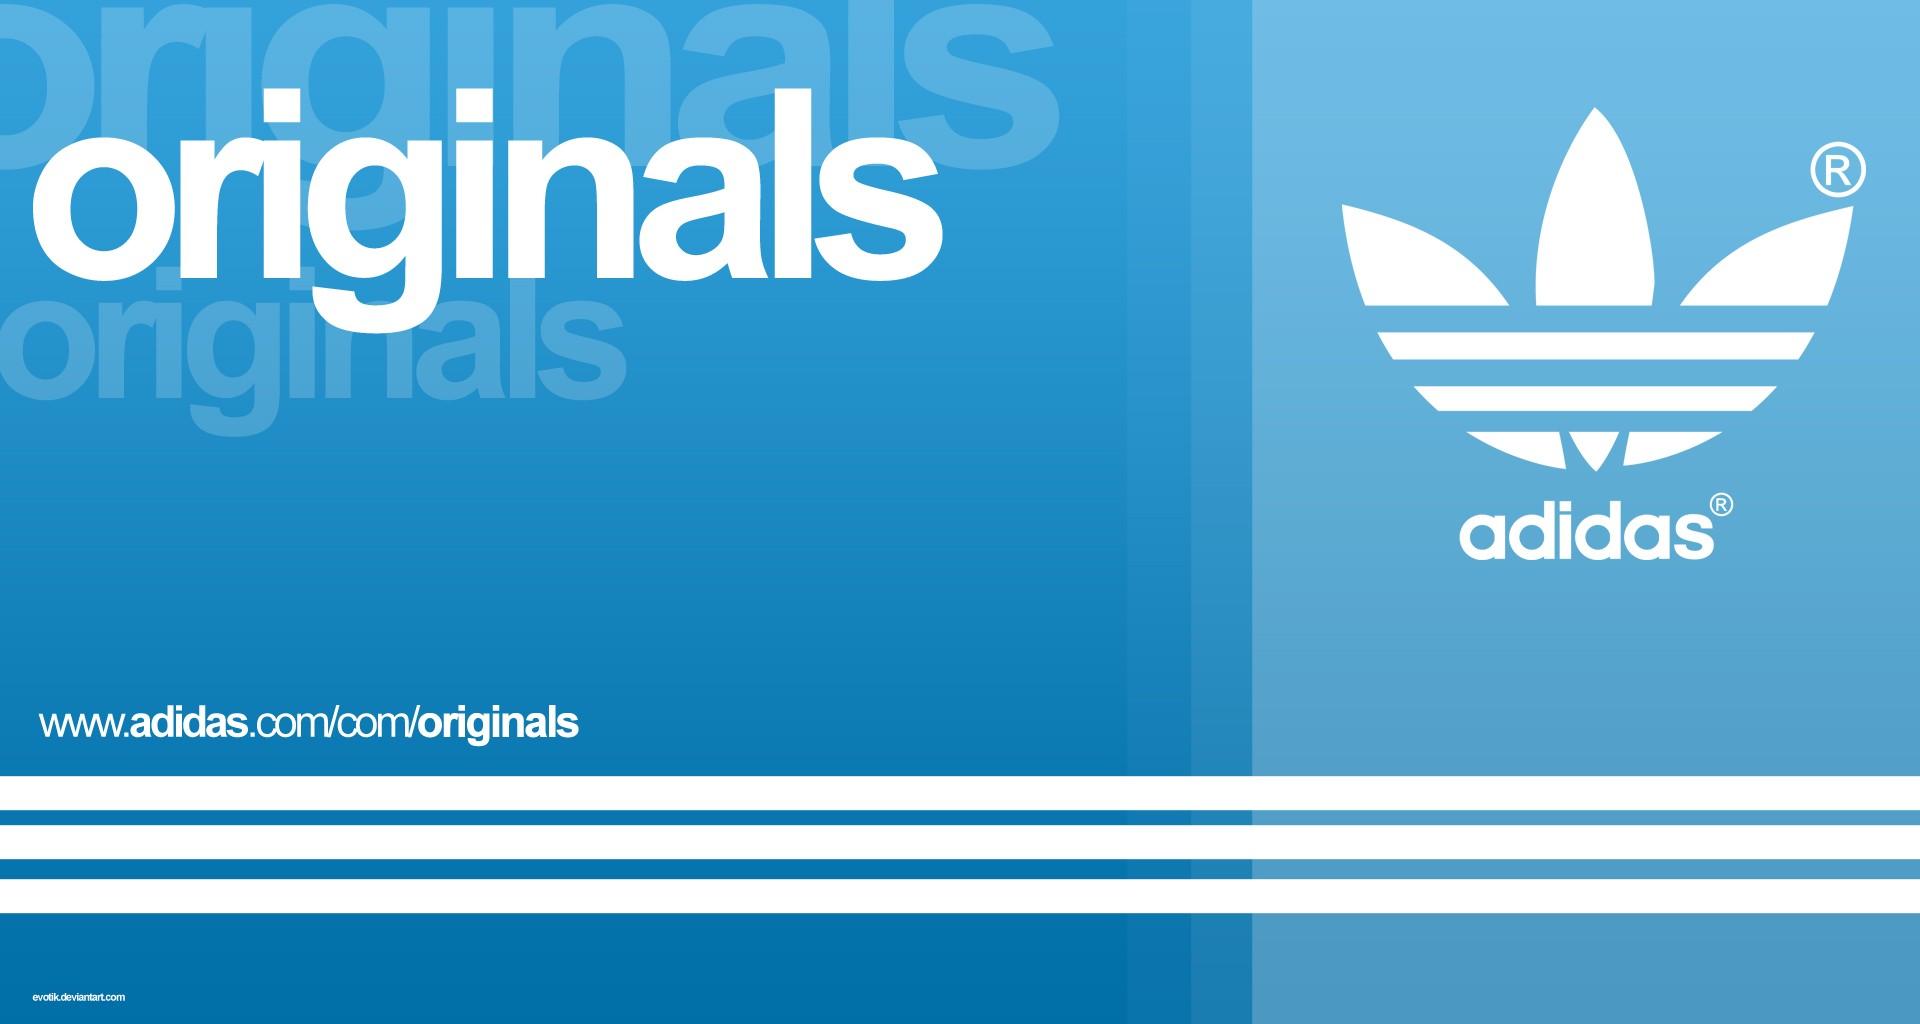 Adidas Classic Wallpapers Wallpaper Cave